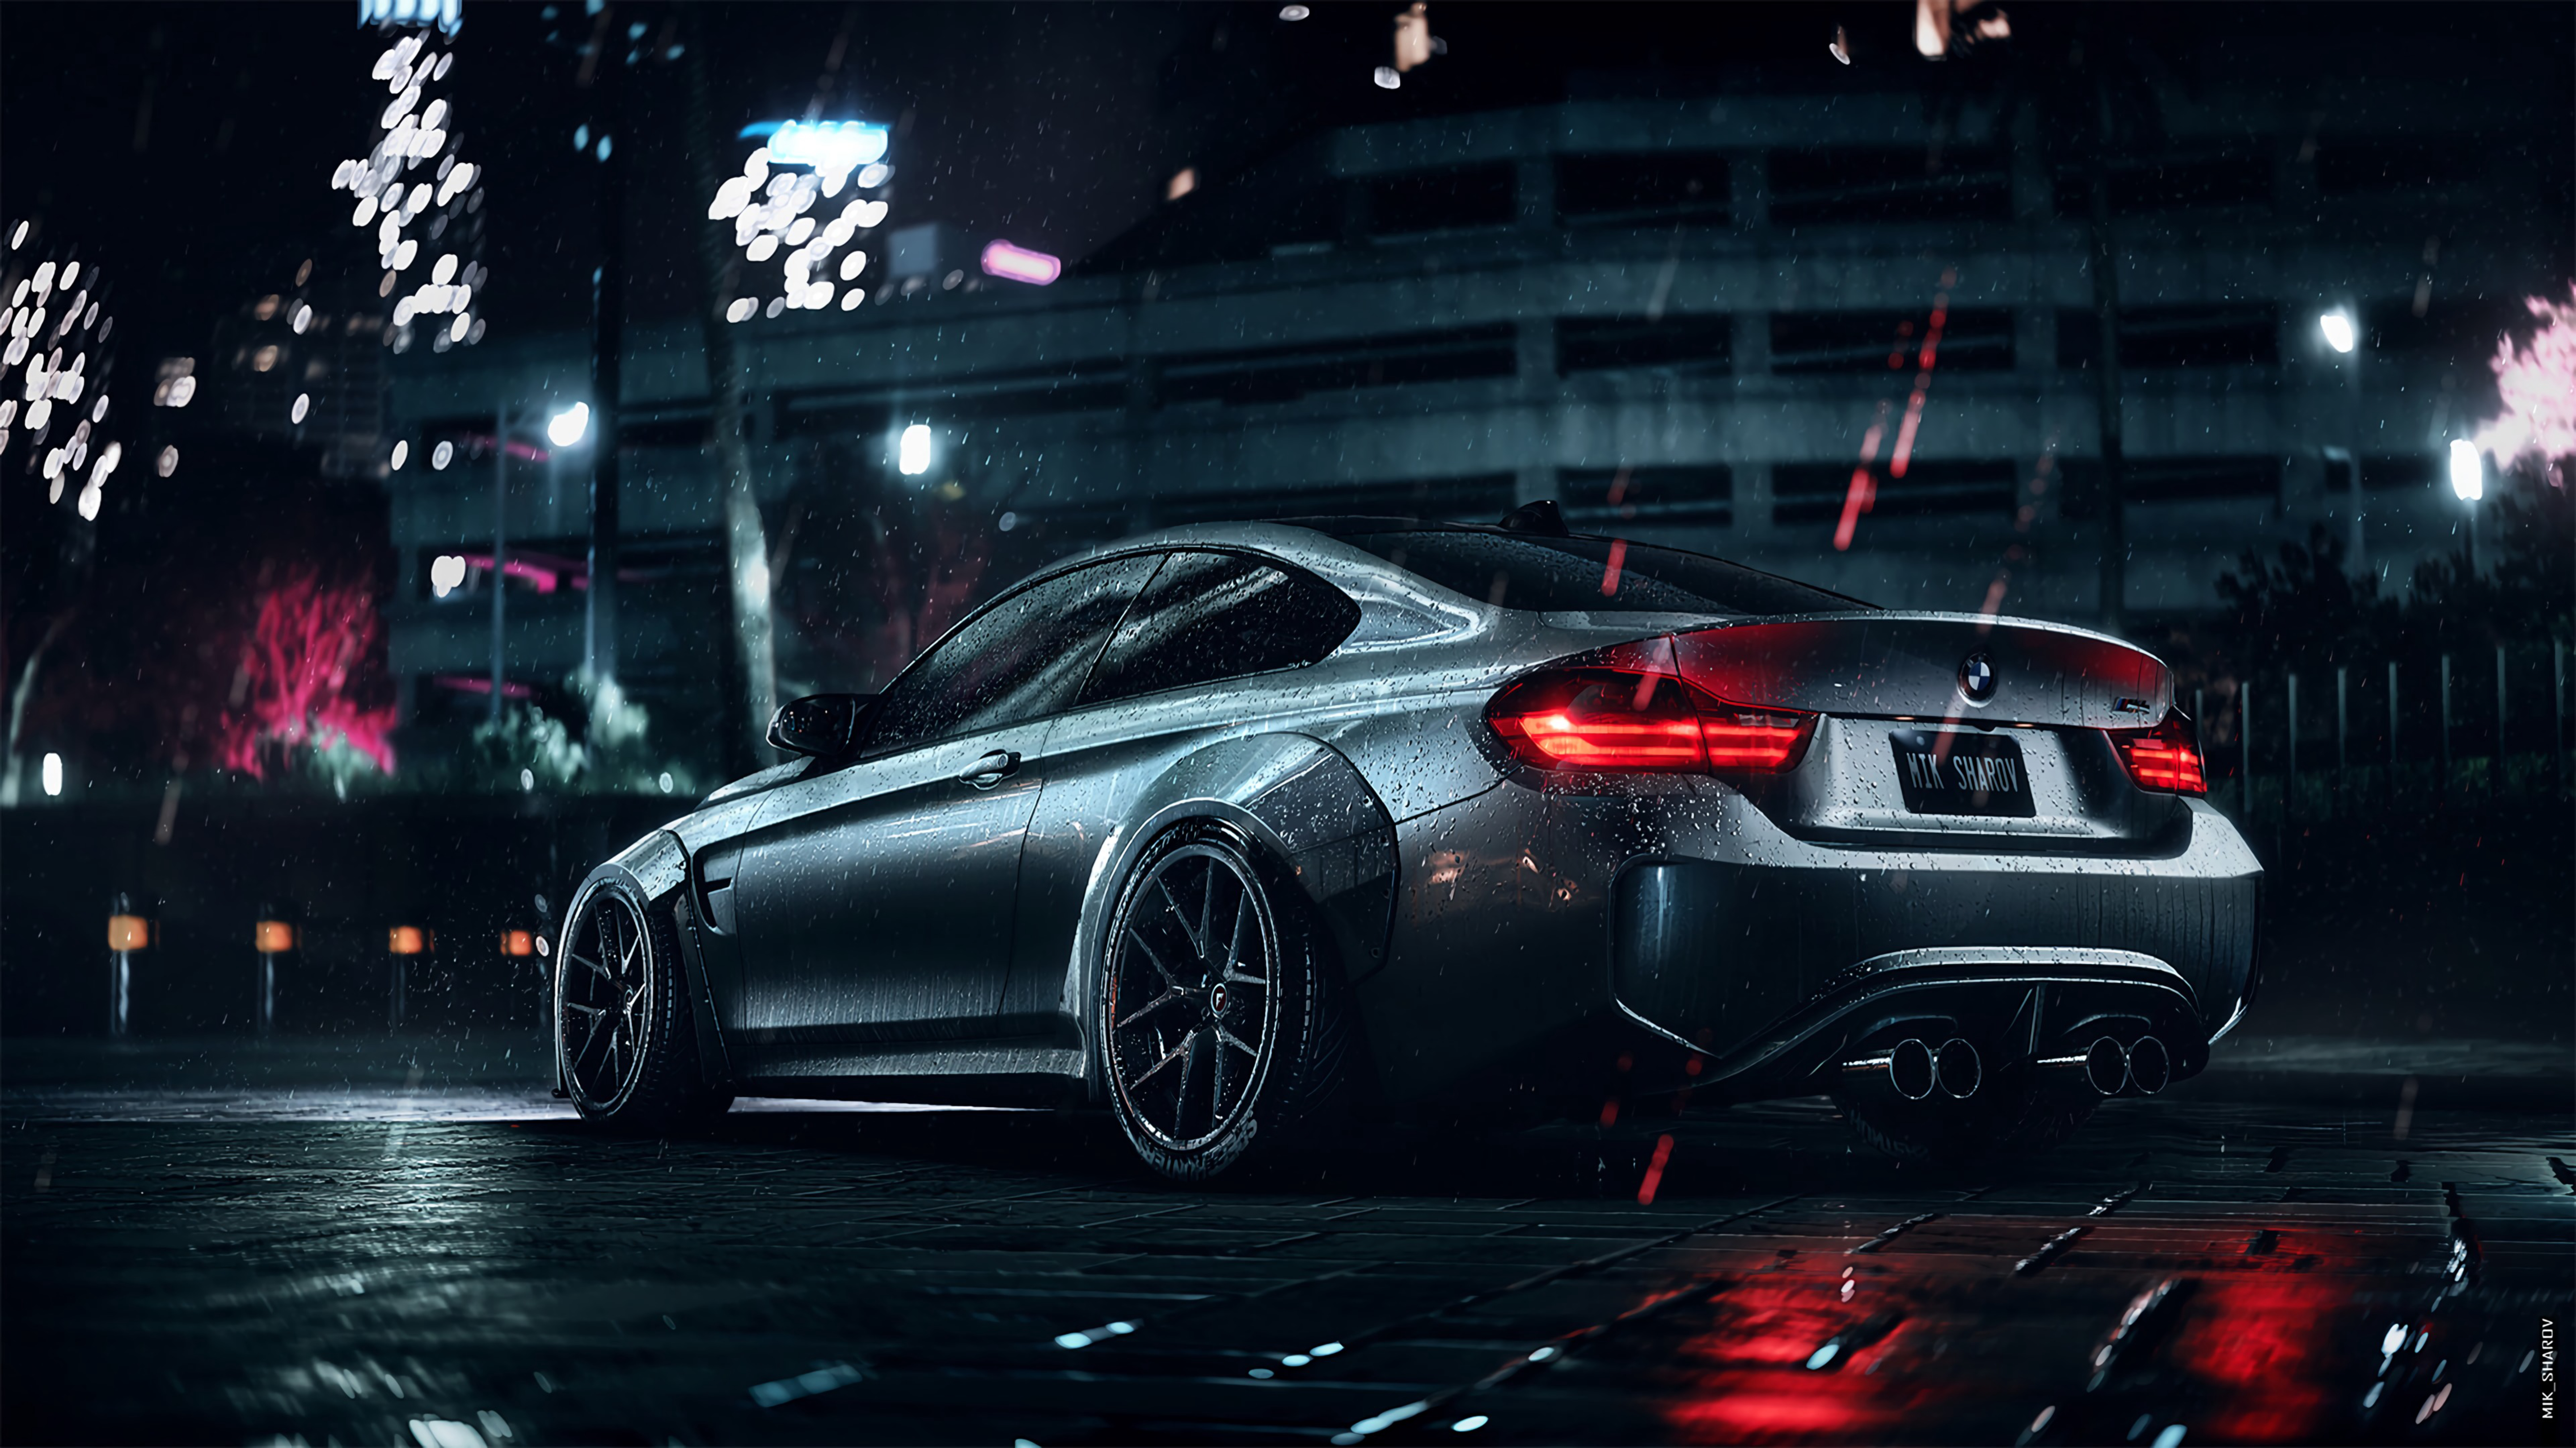 bmw, cars, metallic, car, night, grey, sports, wet, machine, coupe, compartment